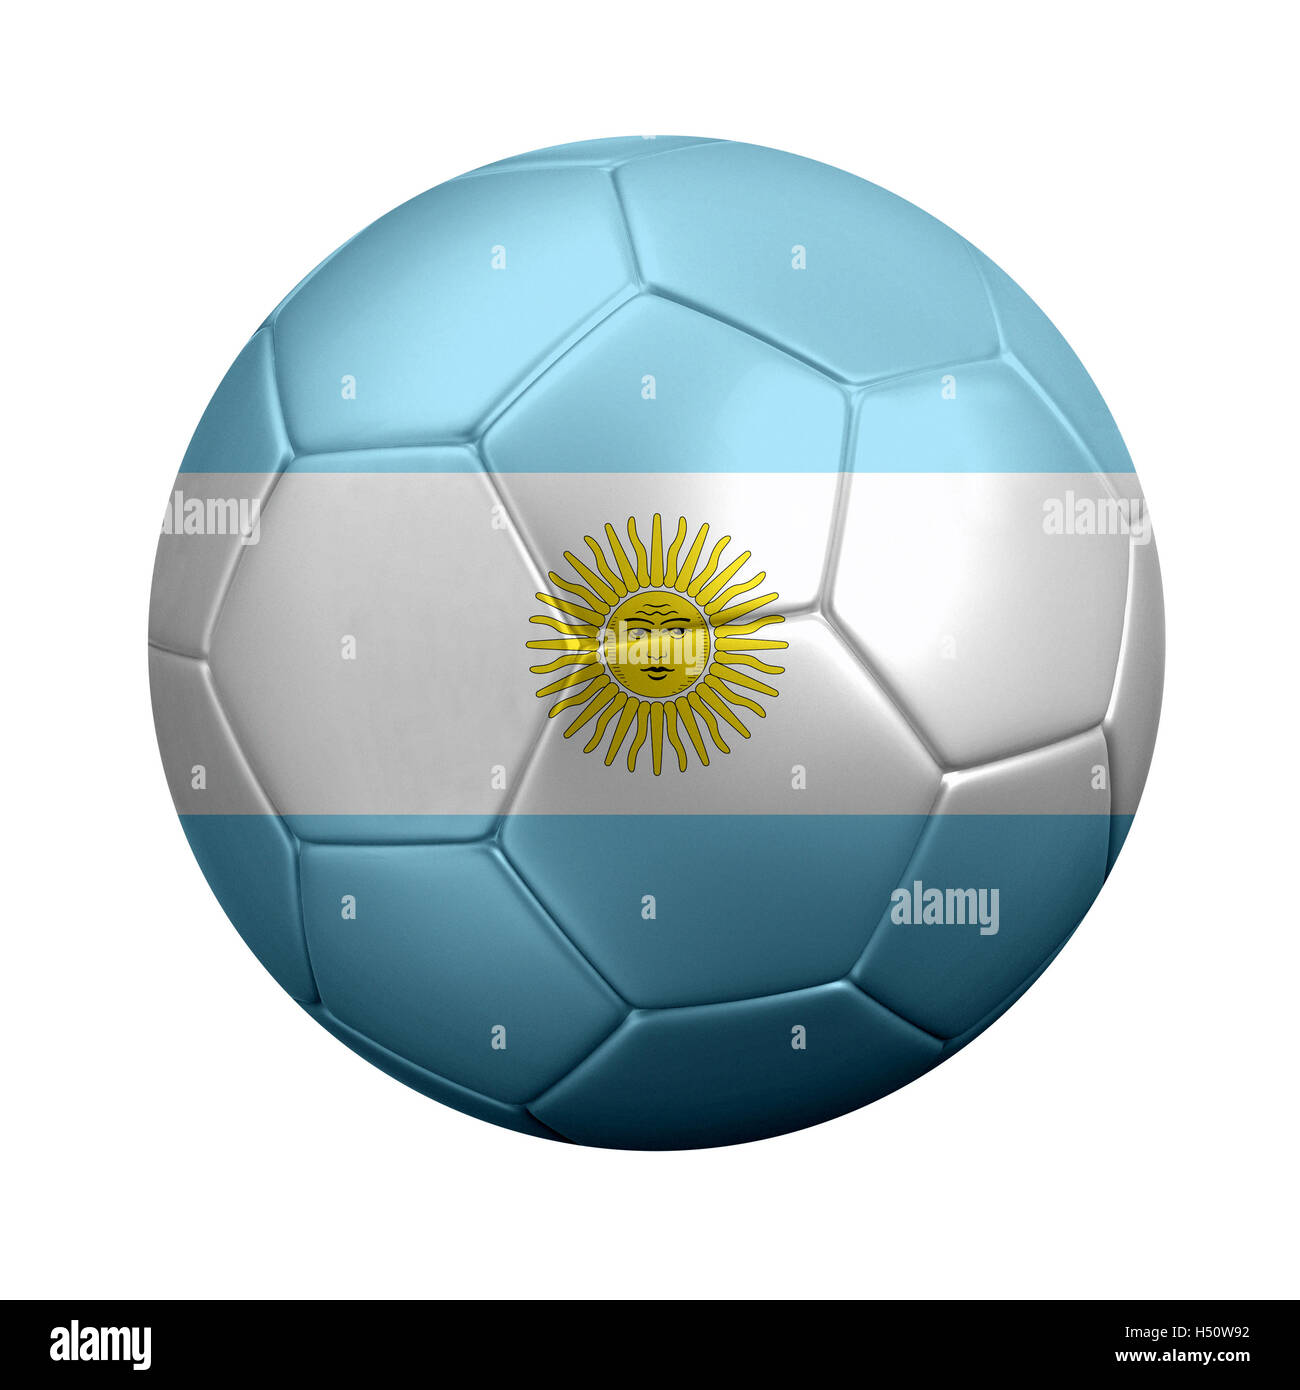 3D-Rendering Fußball in Argentinien Nationalflagge gehüllt. Isolated on White. Stockfoto